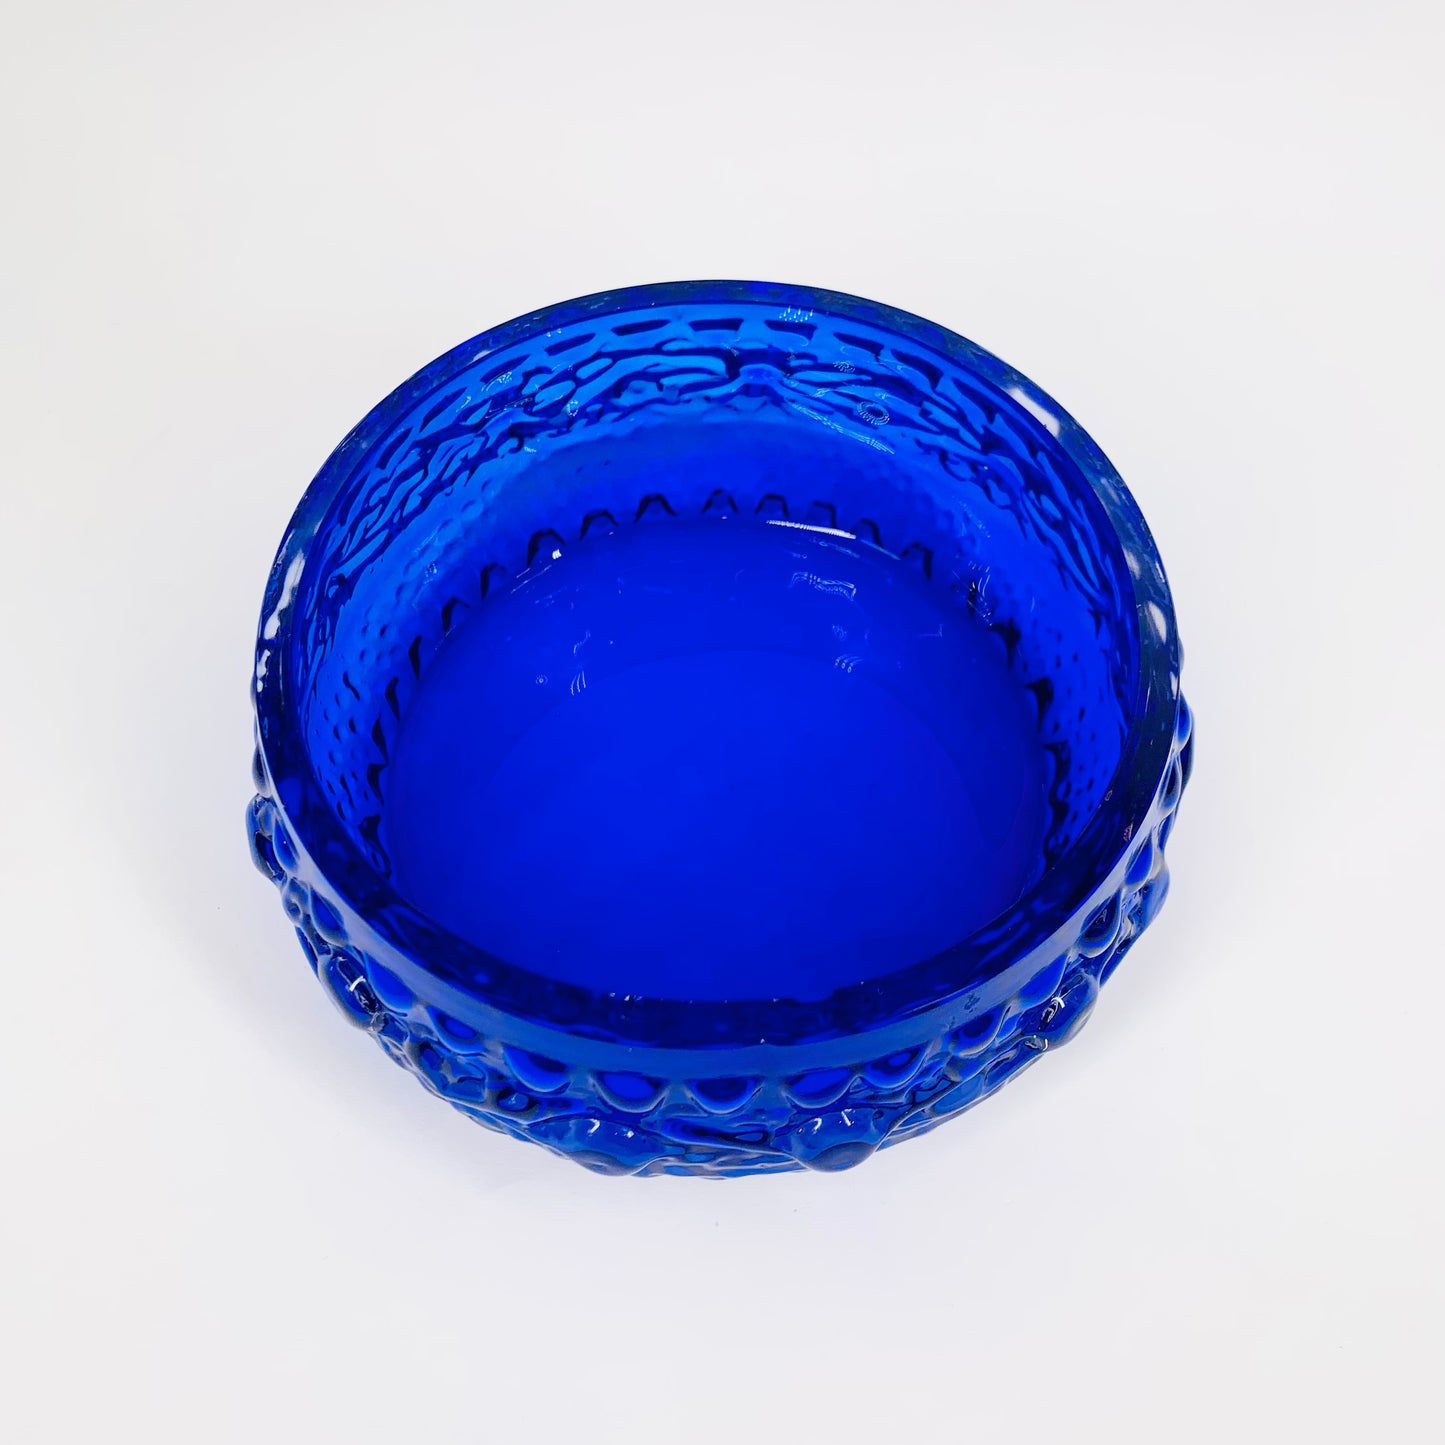 Midcentury Finnish cobalt blue glass bowl by Tamara Aladin with relief